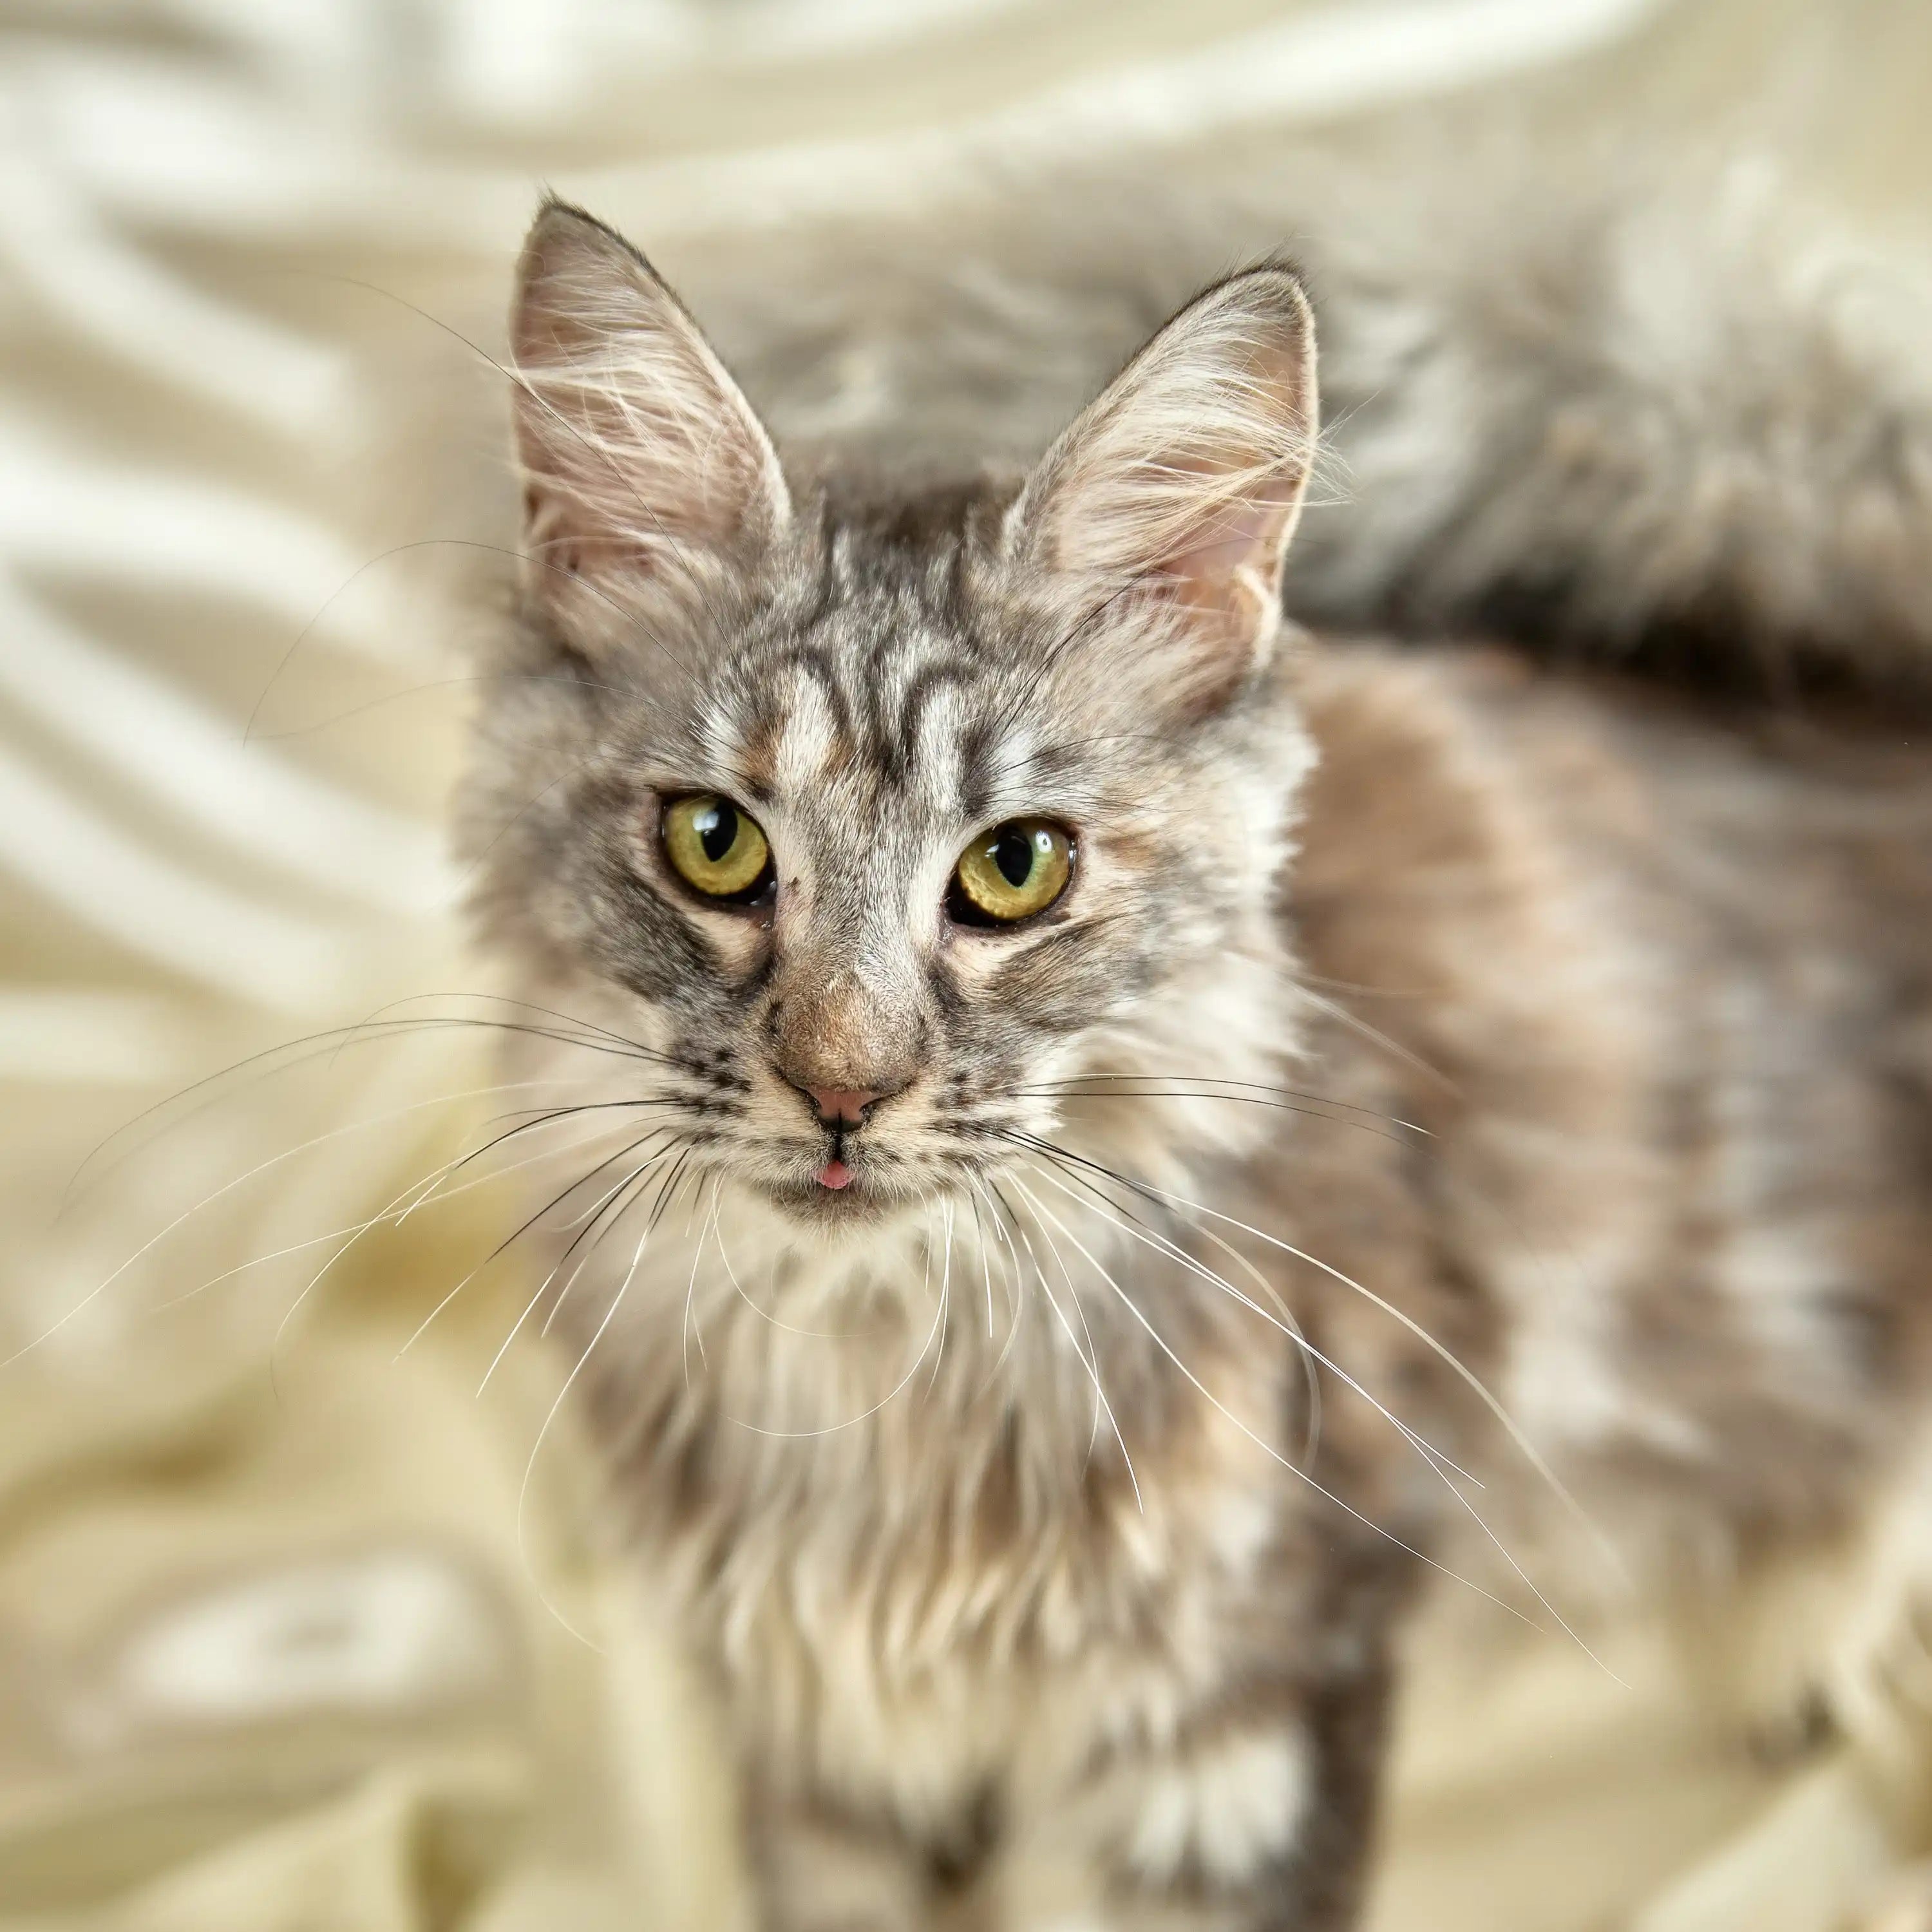 Maine Coon Kittens for Sale | Cats For Ophelia | Kitten